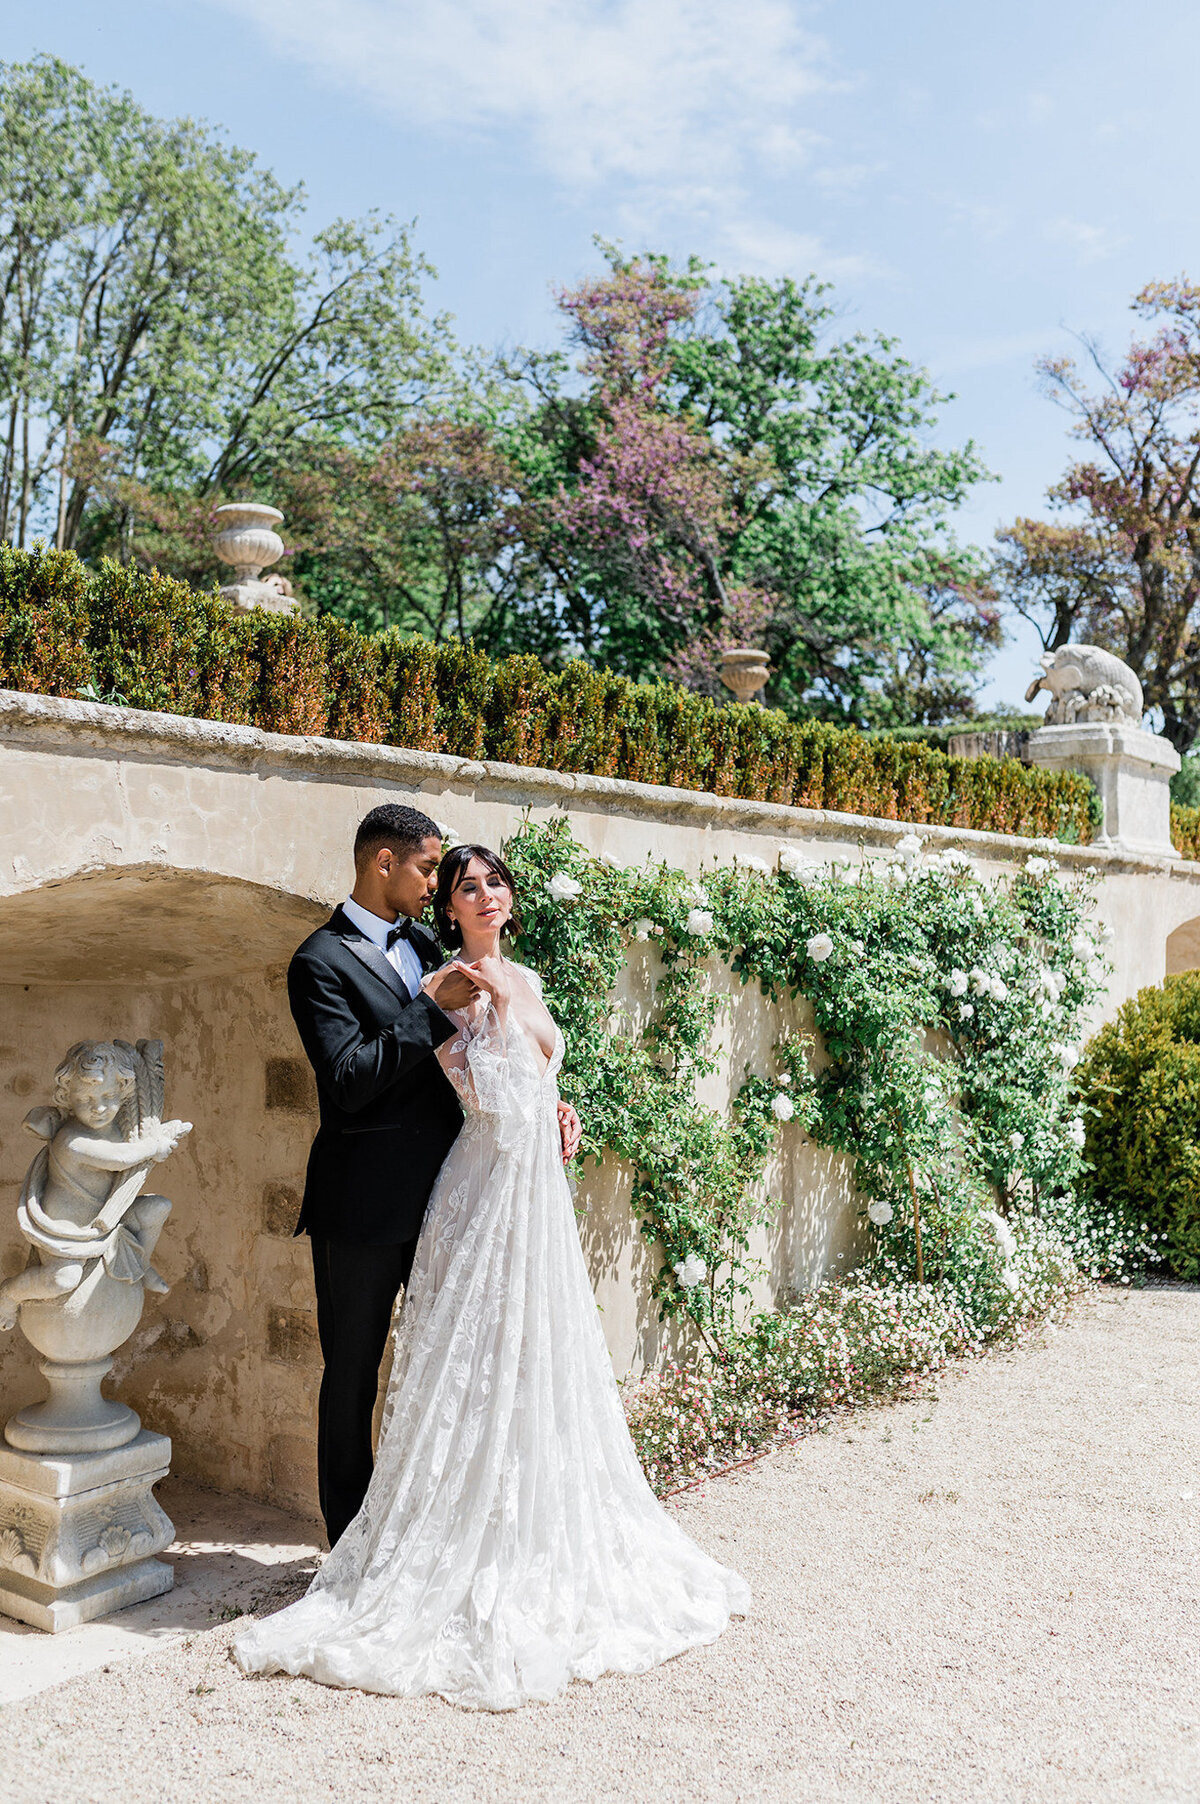 Elevate your wedding experience with the sophistication of fine art aesthetics in France. Amidst romantic settings, we blend luxury and artistry to capture your love's essence in every frame.